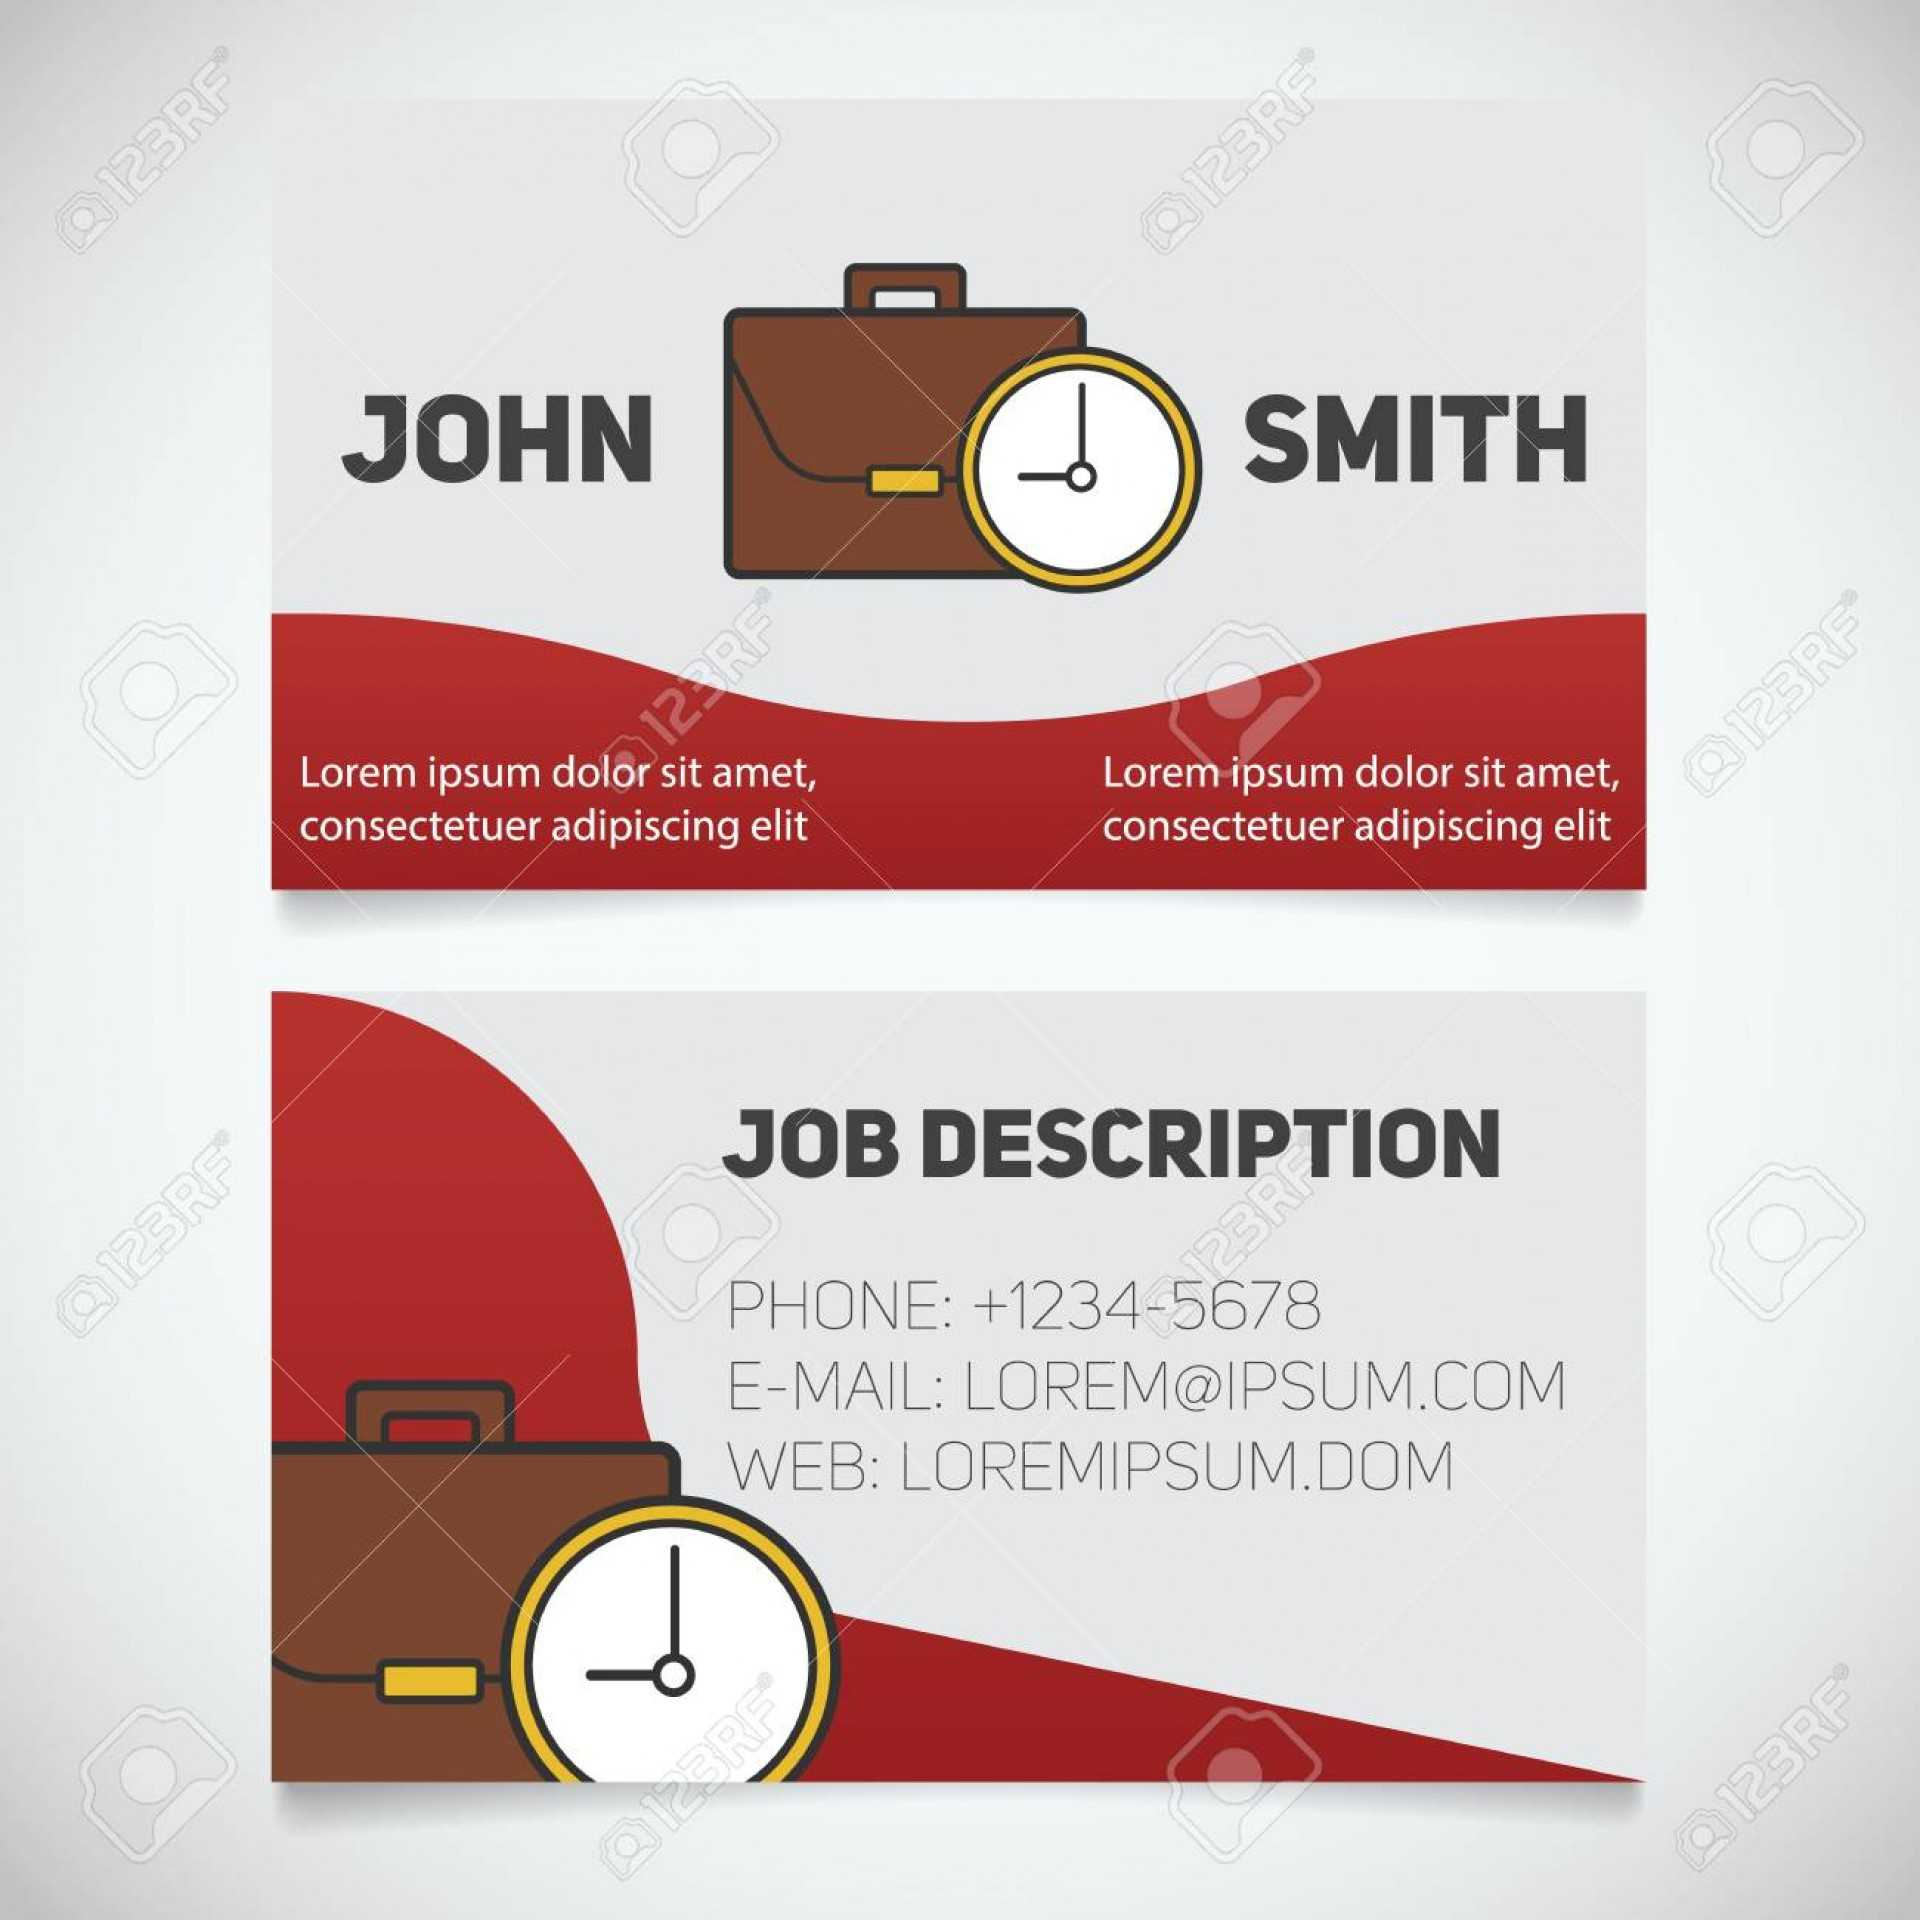 036 Office Business Card Template Ideas Phenomenal Open 8371 Inside Office Max Business Card Template